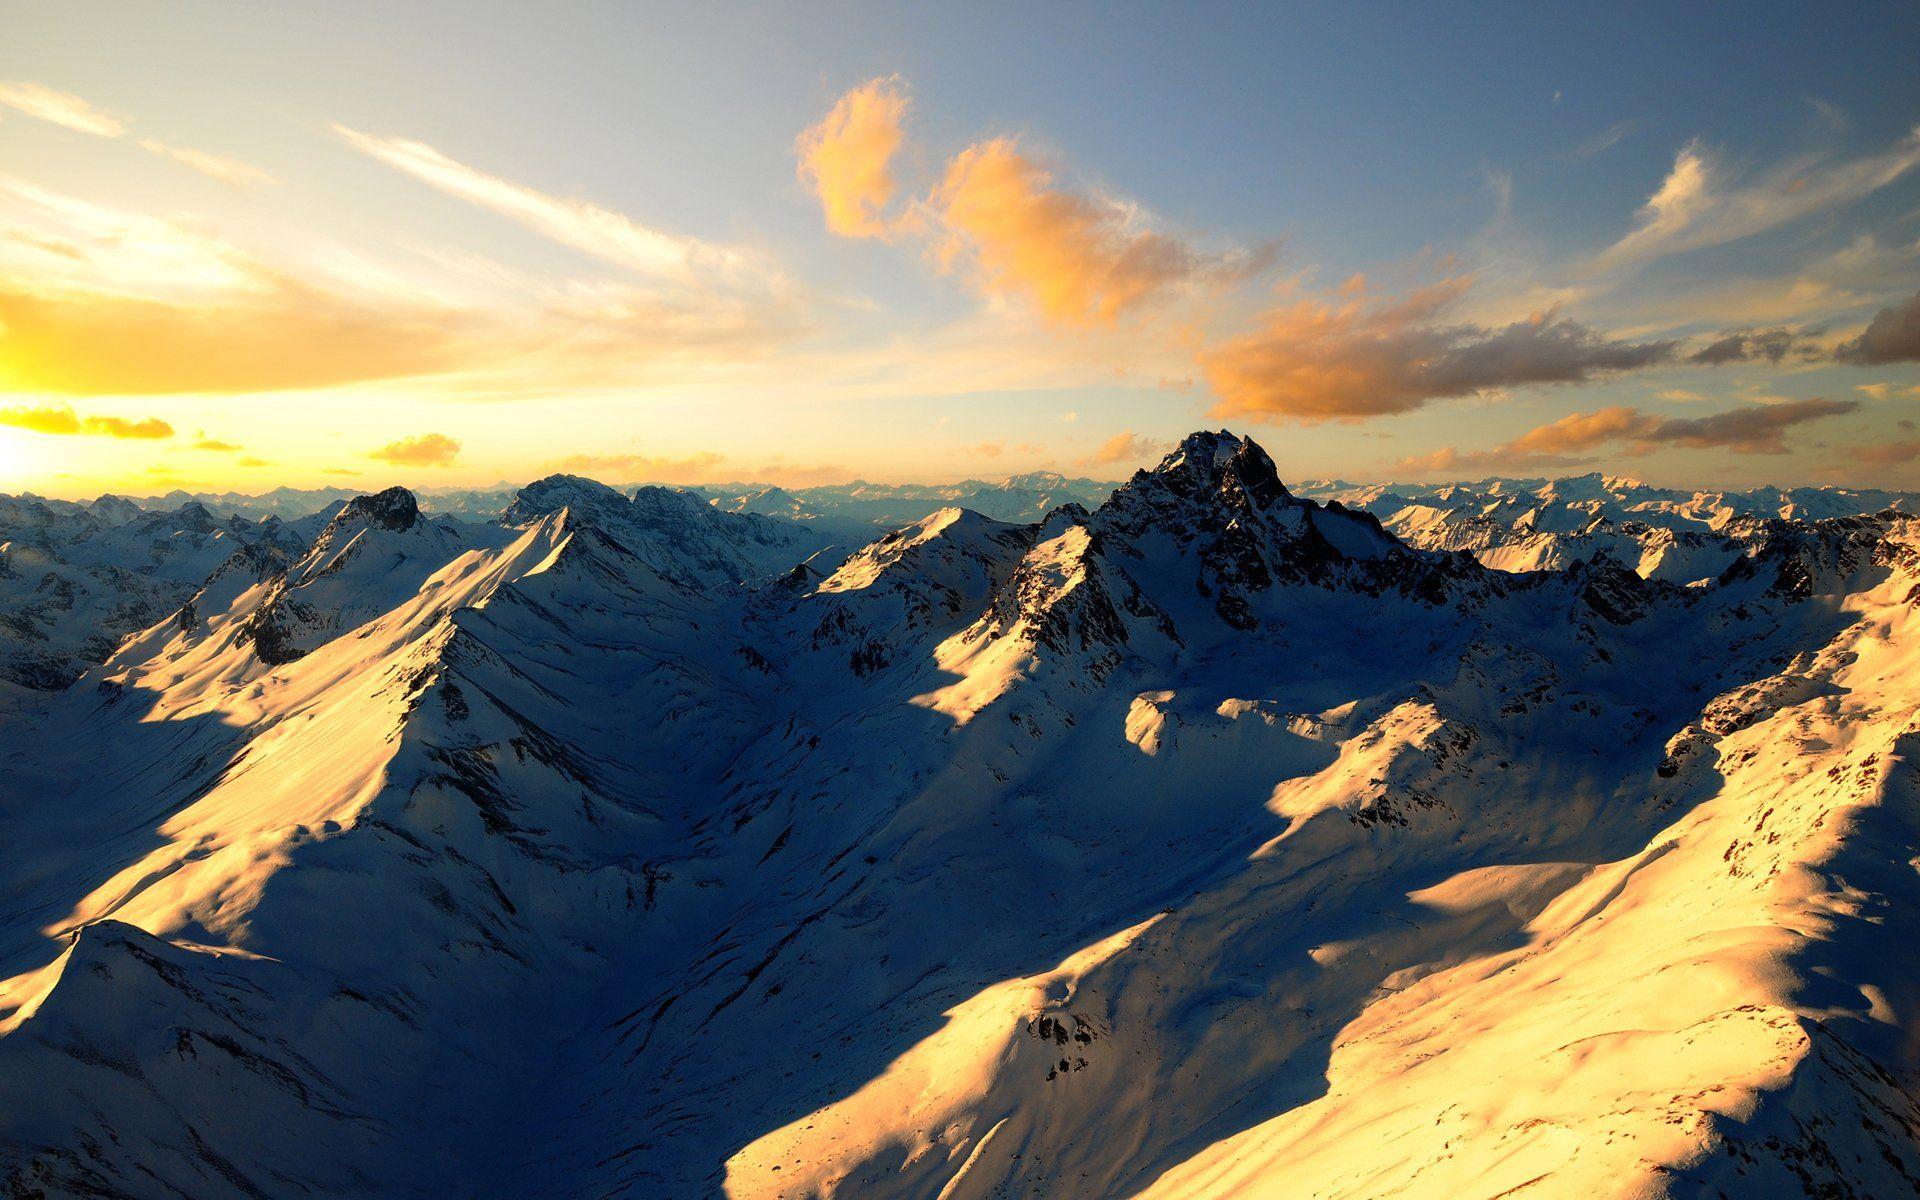 Sunset on a snowy mountain HD Wallpaper. Background Image